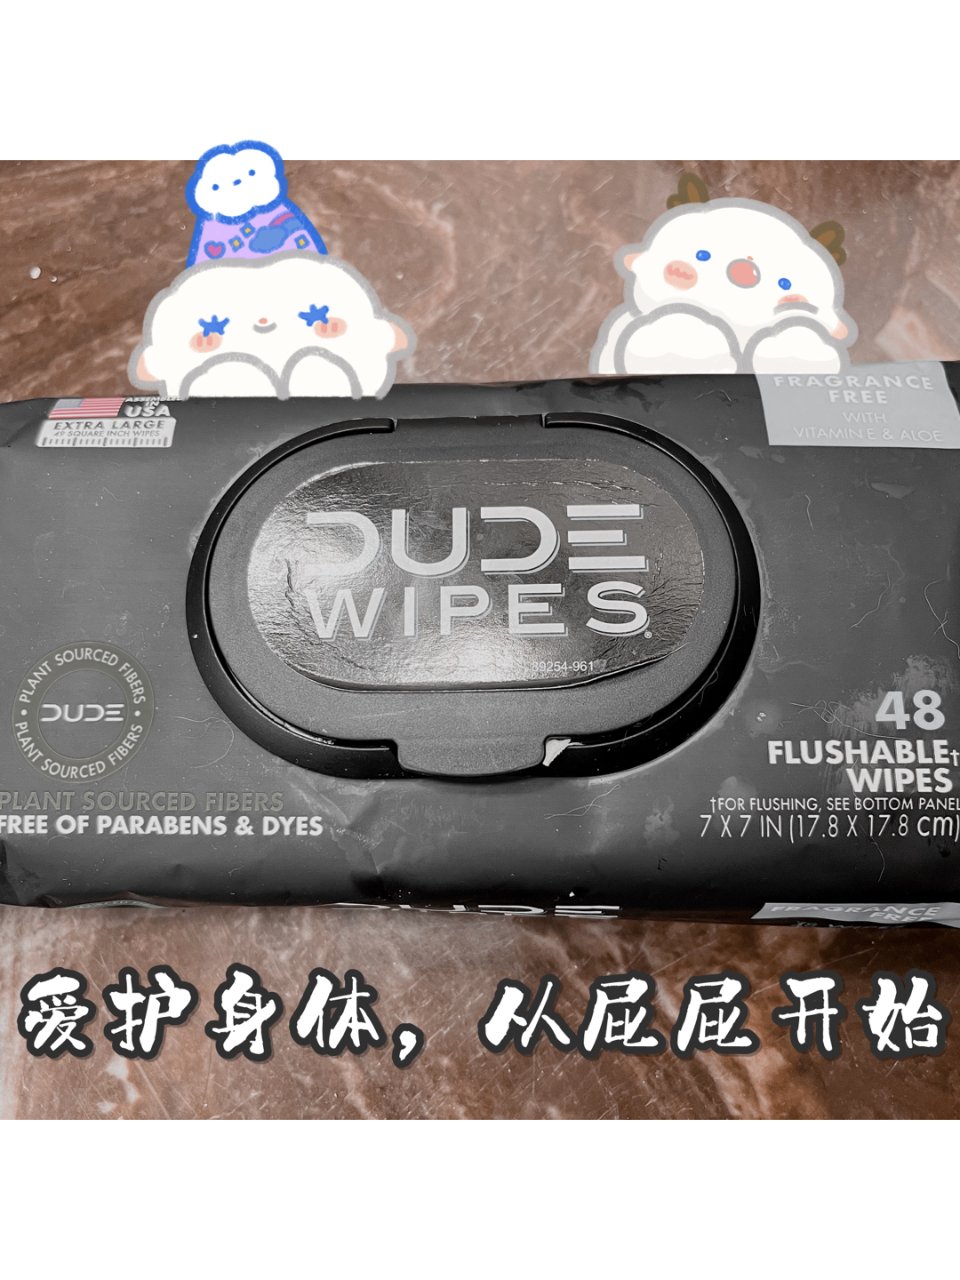 Amazon 亚马逊,DUDE 都德,DUDE Wipes Flushable Wipes Dispenser, Unscented Wet Wipes with Vitamin-E & Aloe for at-Home Use, Septic and Sewer Safe, 48 Count (Pack of 6) : Health & Household